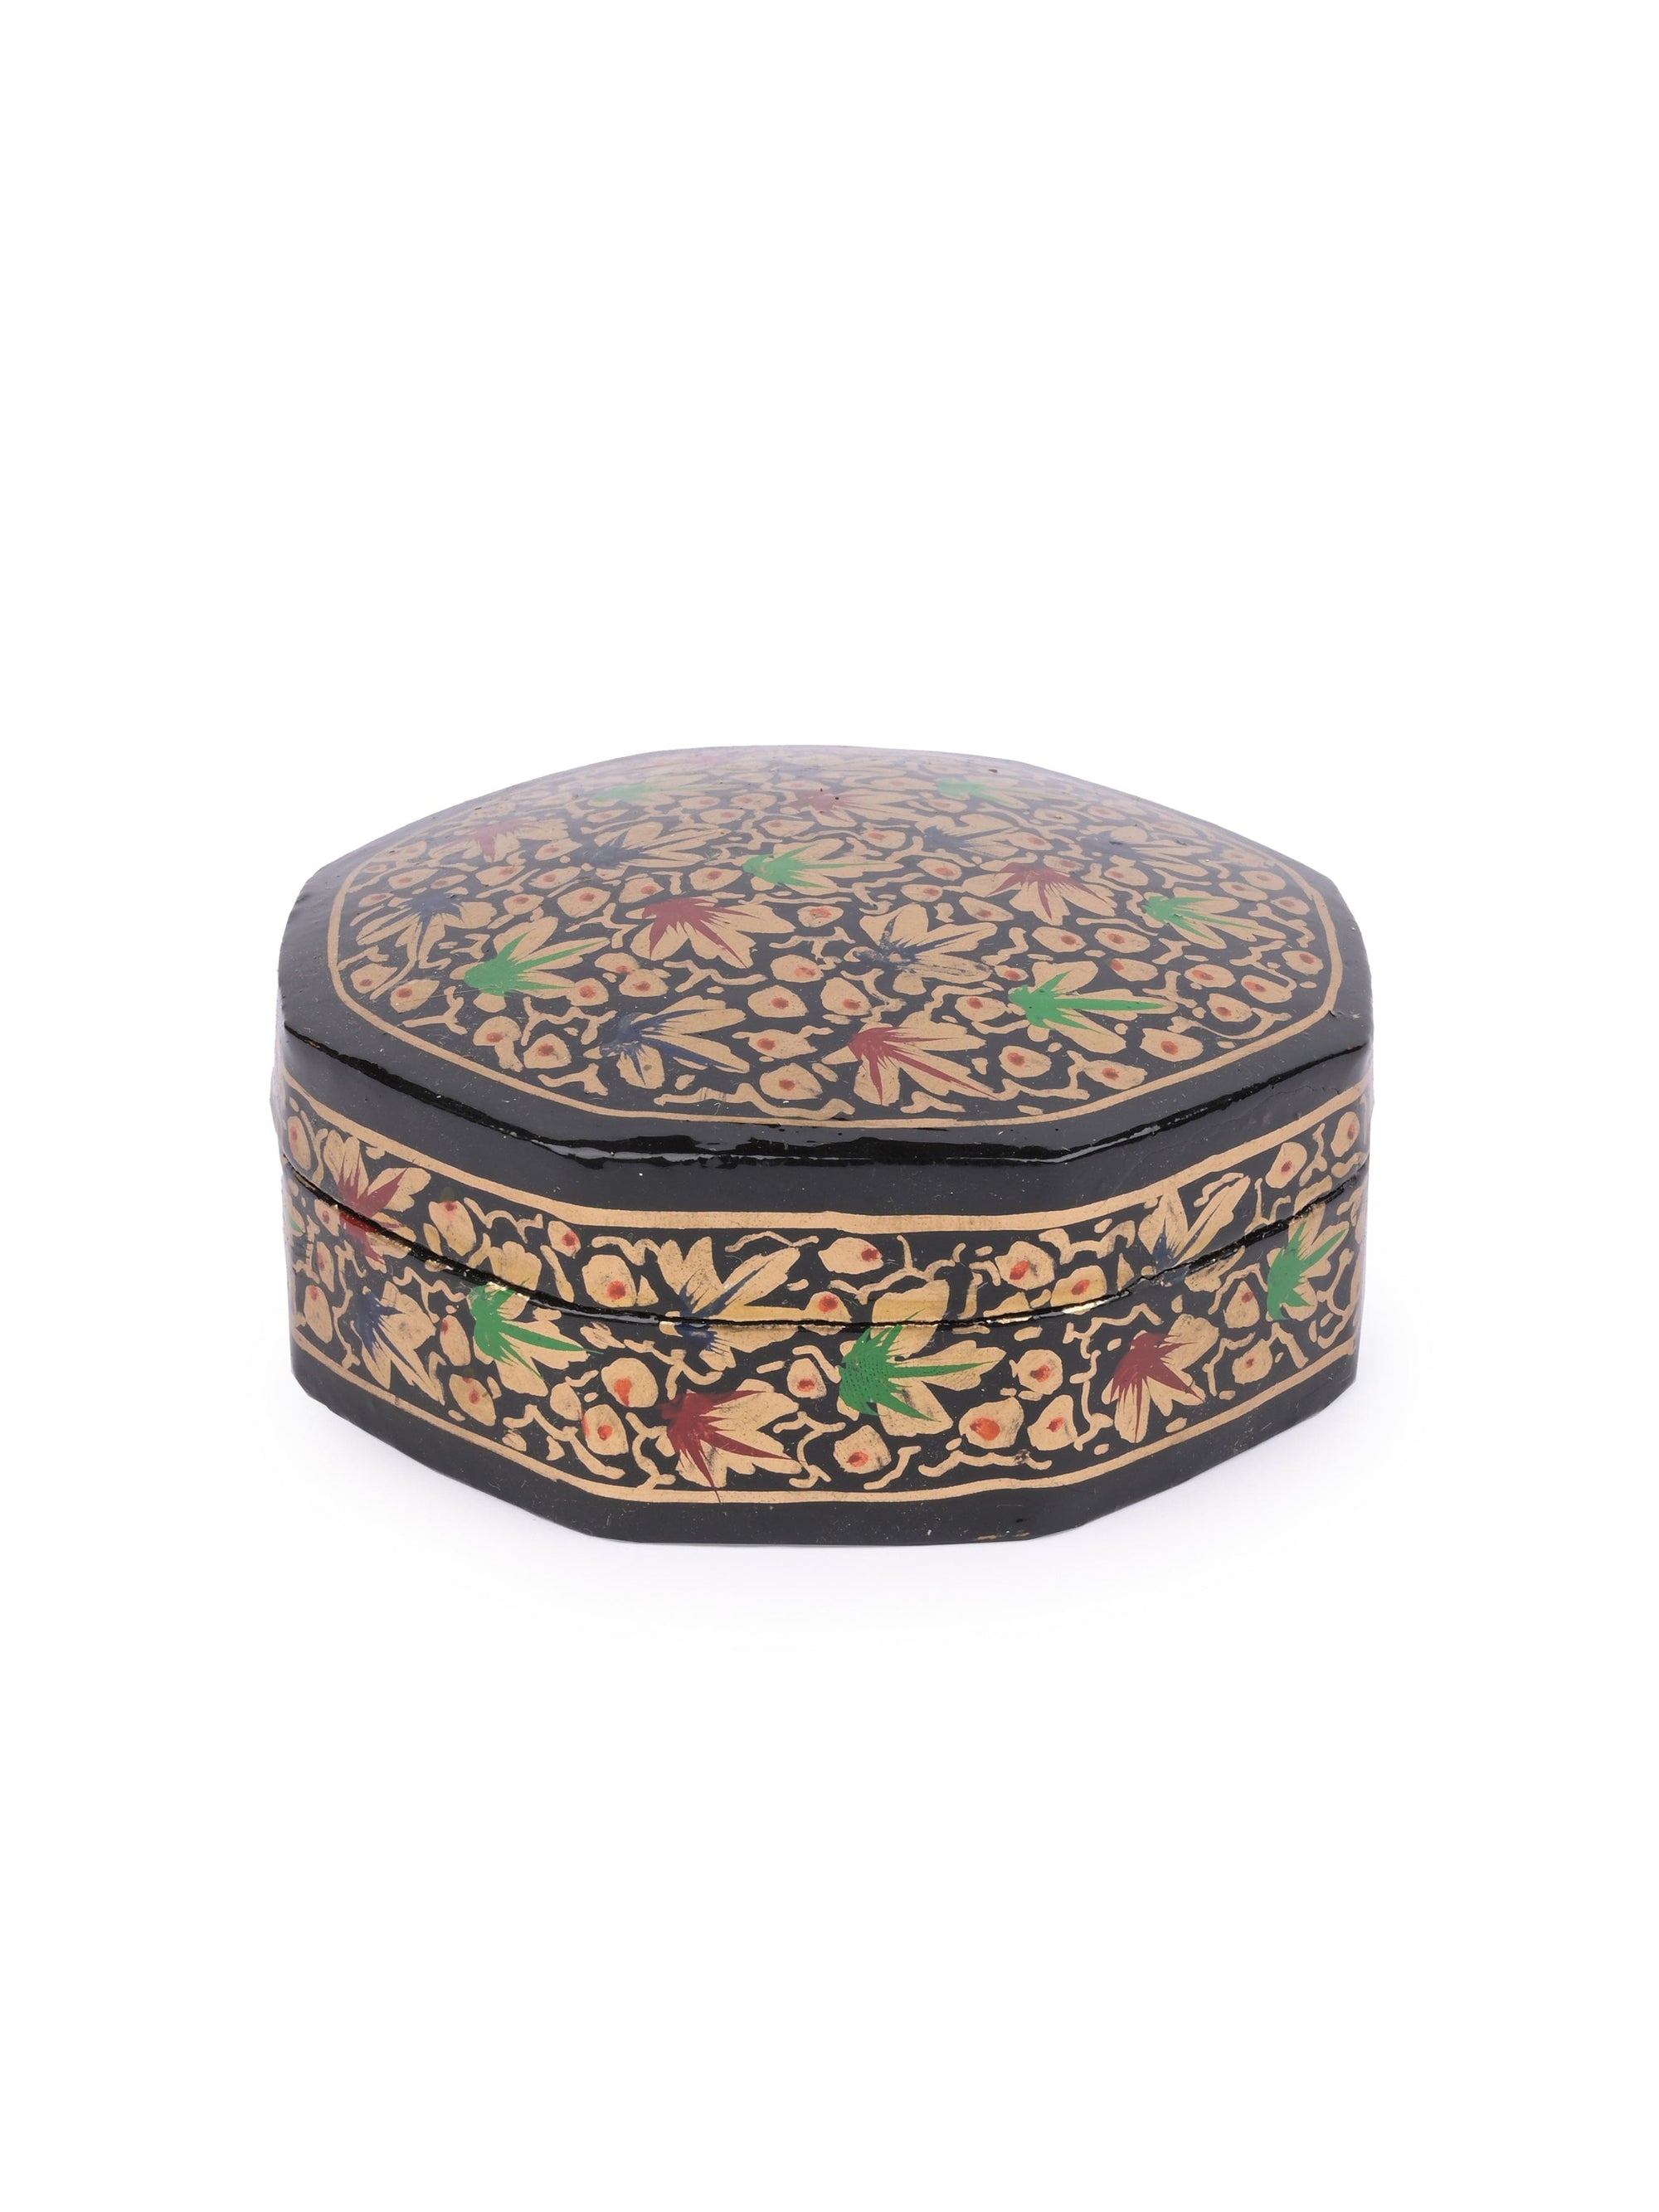 Floral Handmade Round Shaped 6 pcs Paper Mache Coaster set in a box